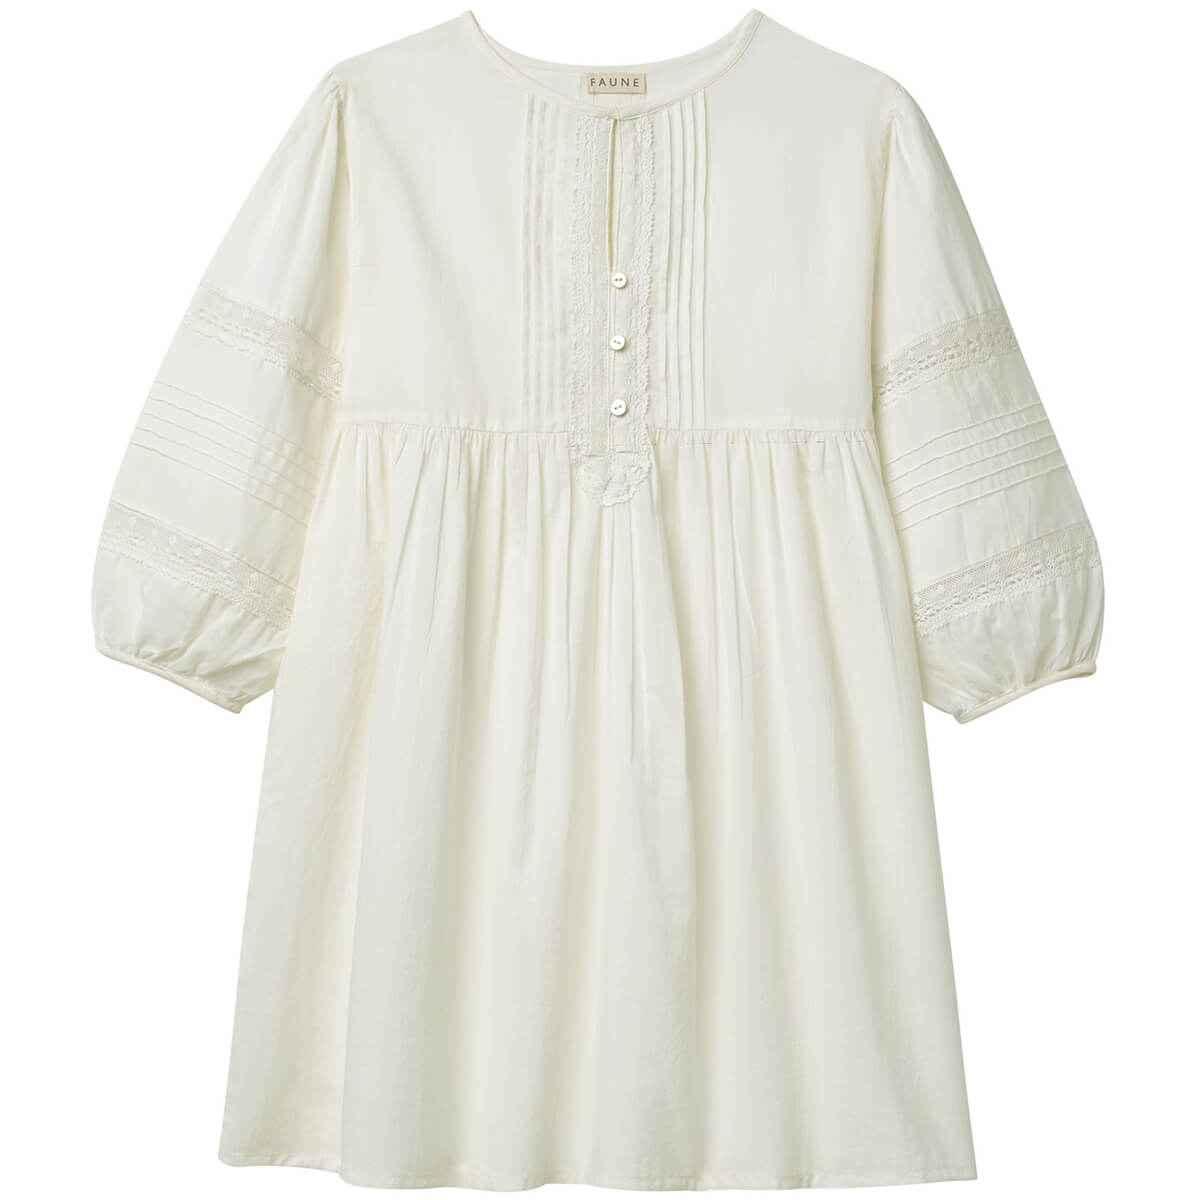 The Maple Dress in Vintage White by Faune – Junior Edition